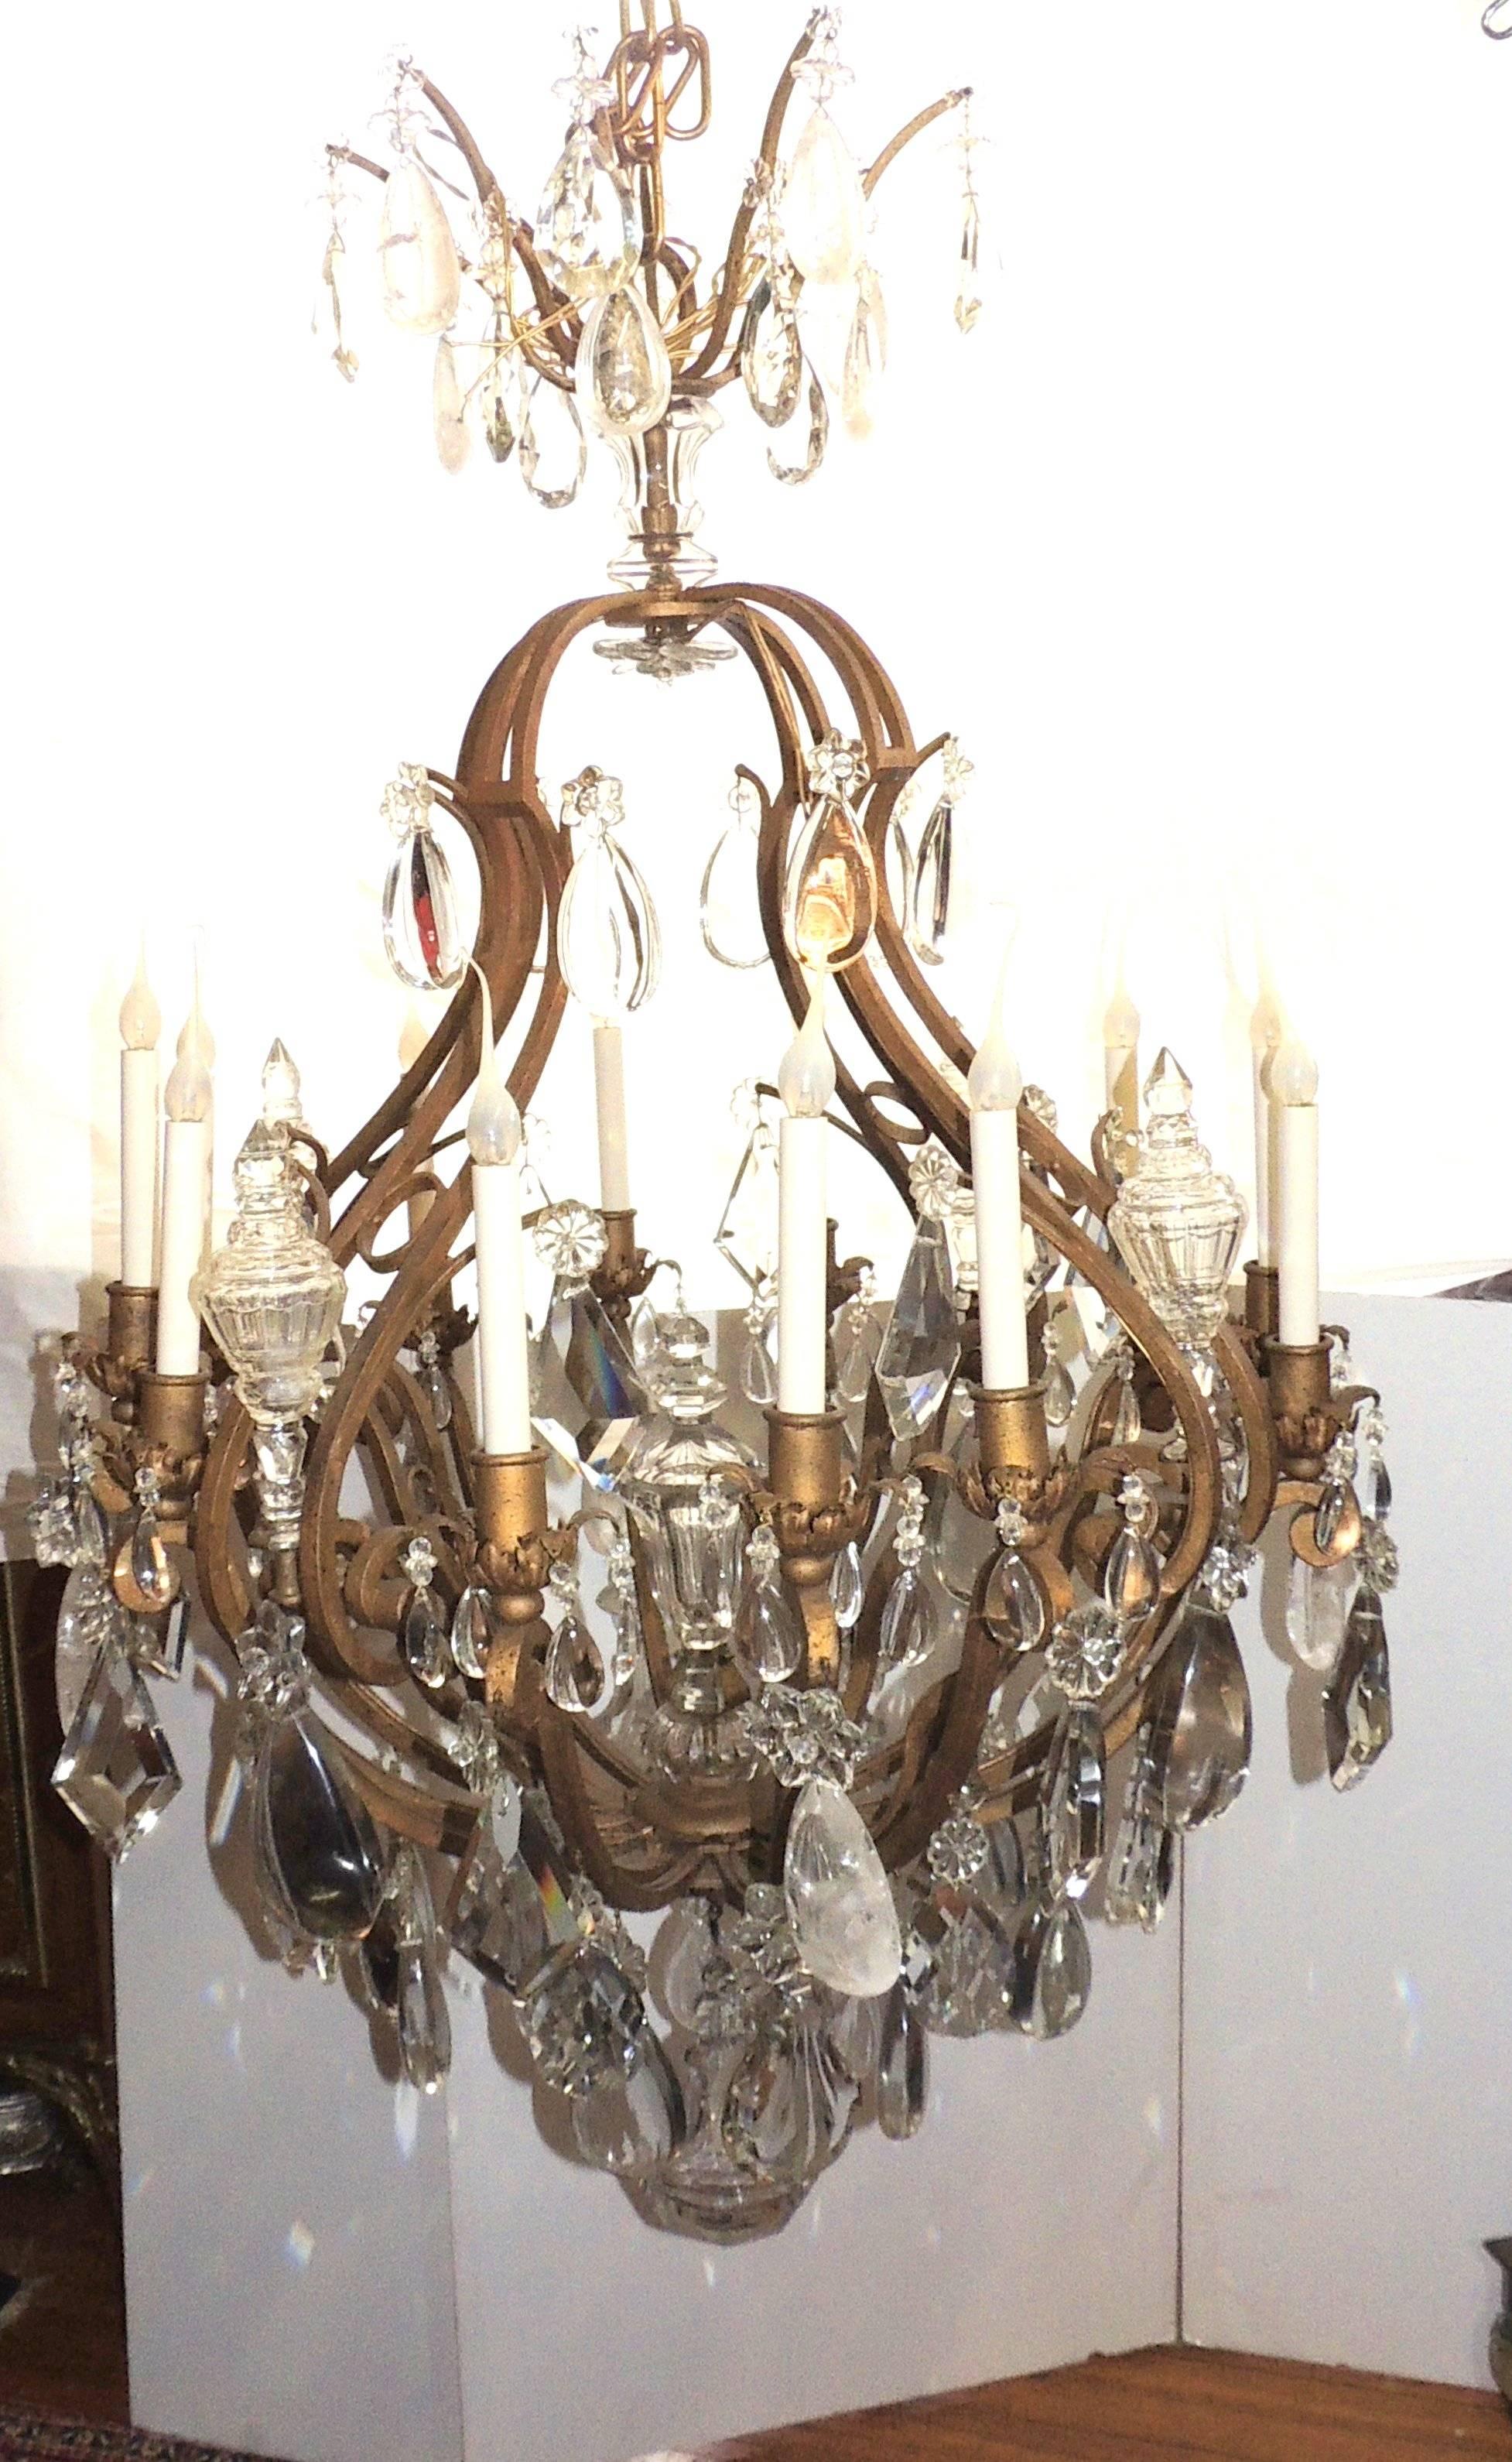 This wonderful Very Large 1920s gilt iron French cage chandelier has twelve lights with an assortment of flat, prism, faceted and rock crystals finished with a large beveled ball at the bottom. In the Bagues Manner

Measures: 55